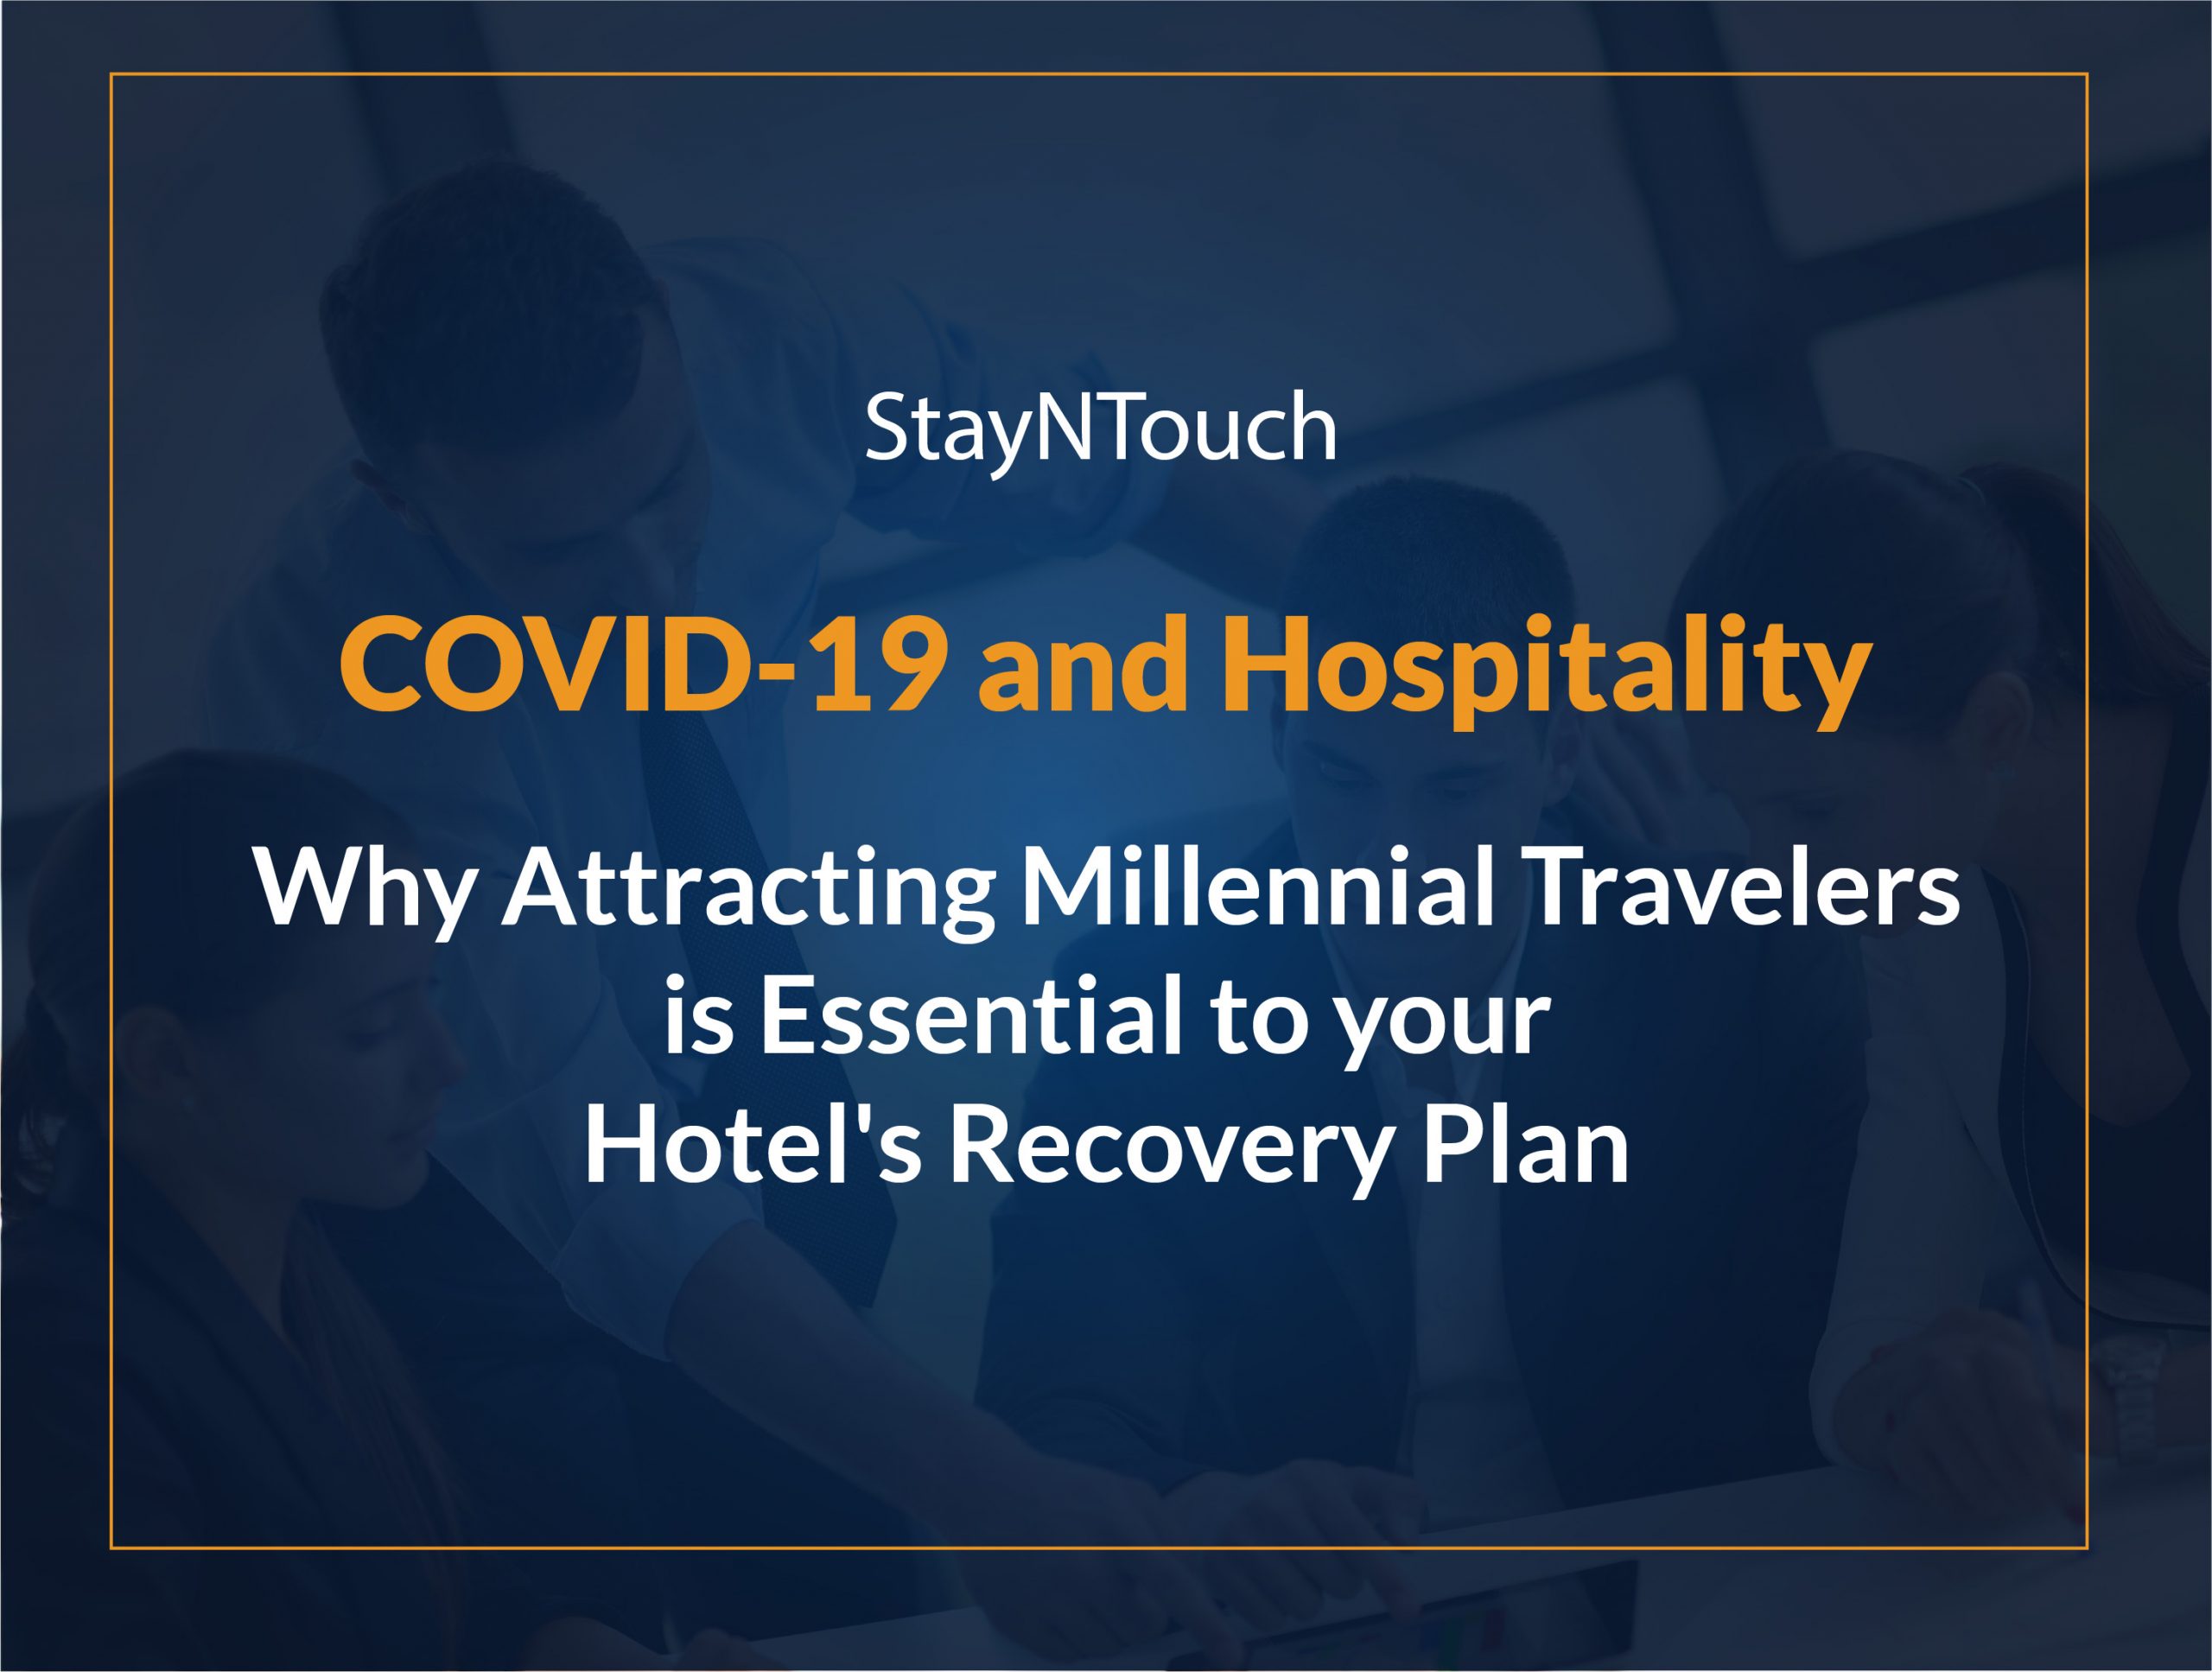 Covid-19 hotel Recovery Plan